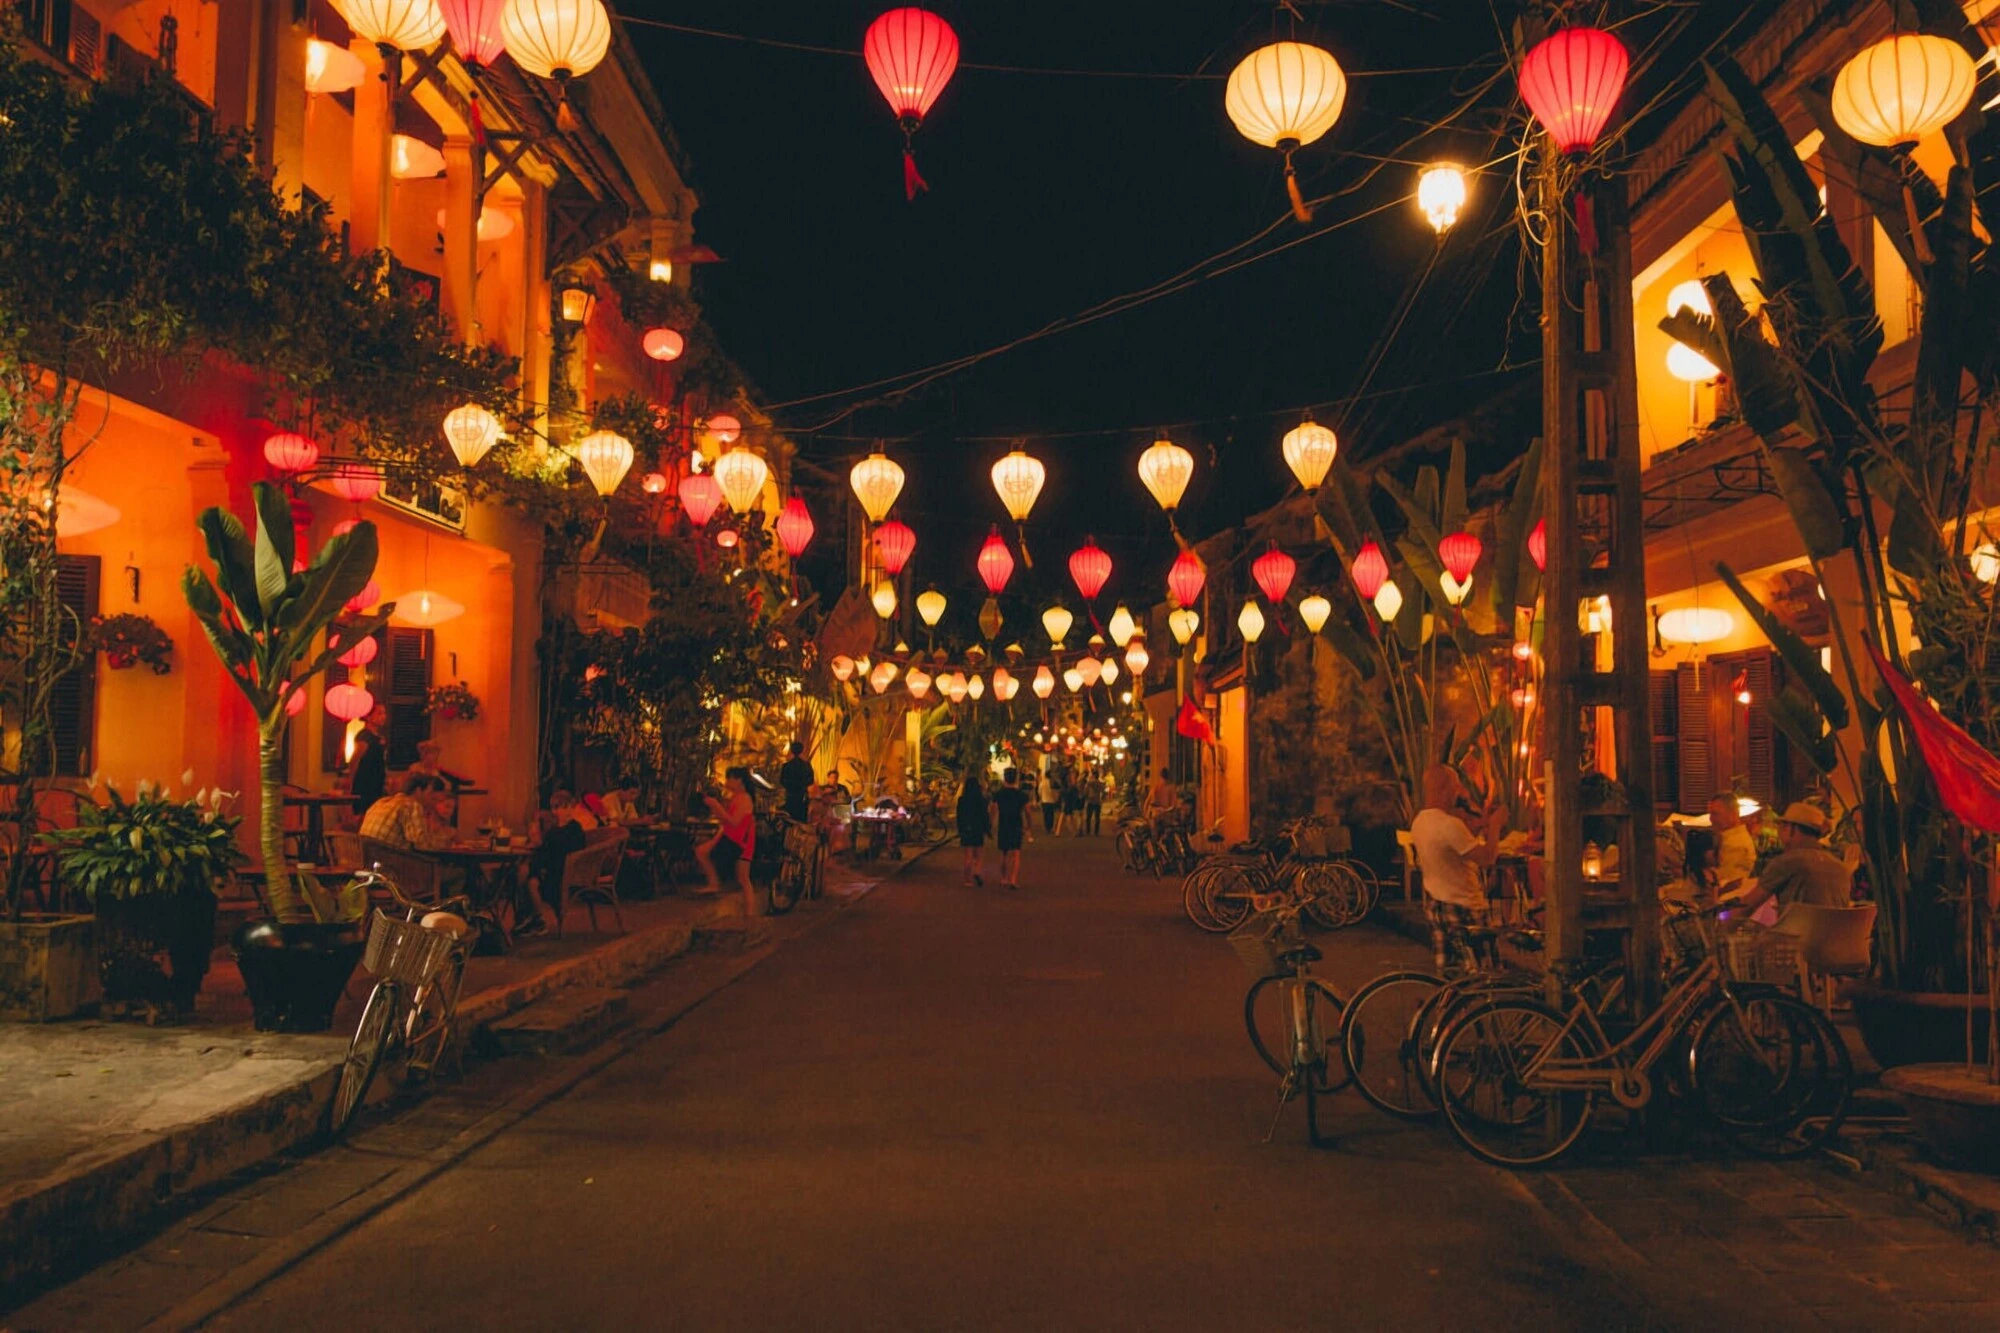 The Colorful Lanterns of Hoi An's Ancient City, Vietnam - A Backpacking Travel Guide